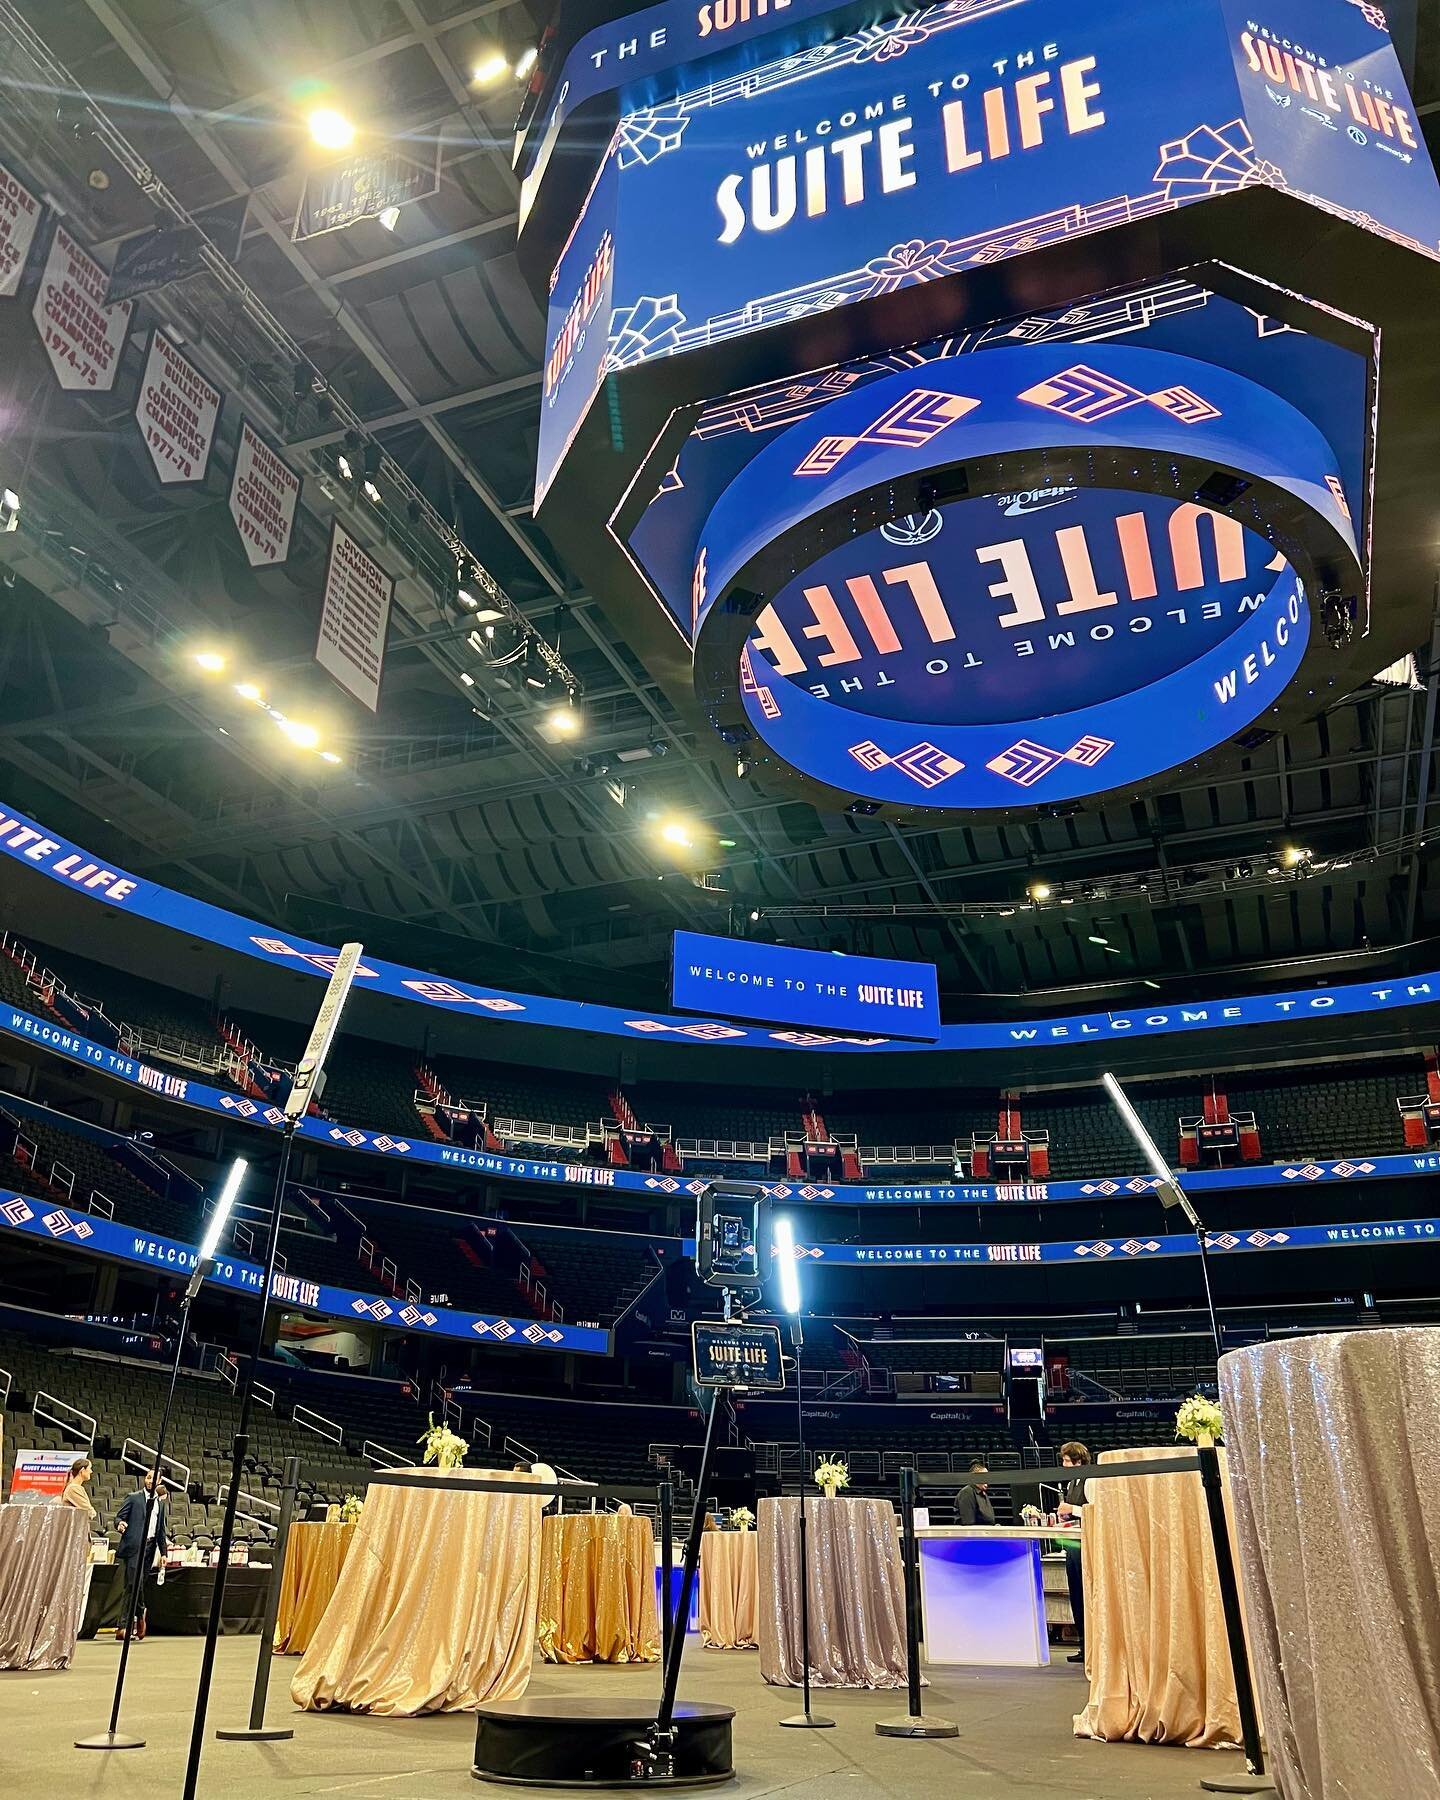 We love our open air photo booths, but we won&rsquo;t turn down an opportunity to bring our 360 Booth on to the @capitalonearena floor. Thank you @monumental_sports for having us out for your Suite Life event. Hit us up if you&rsquo;re looking to mak